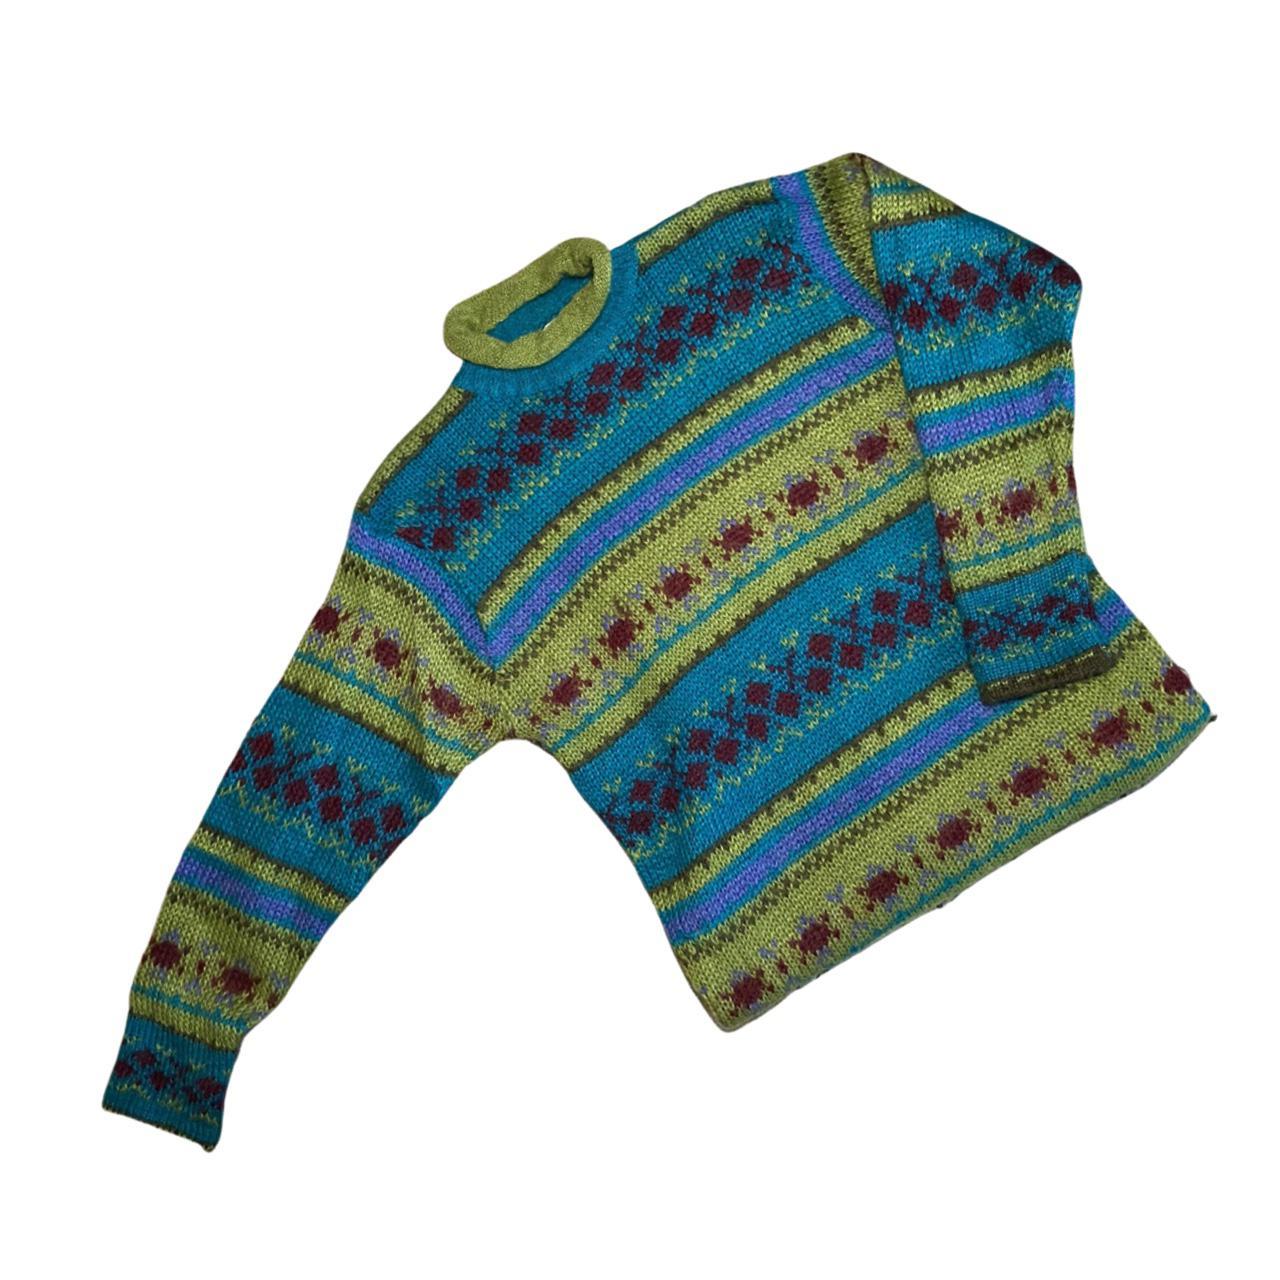 Product Image 1 - COOLEST vintage 70s sweater !!

Mohair